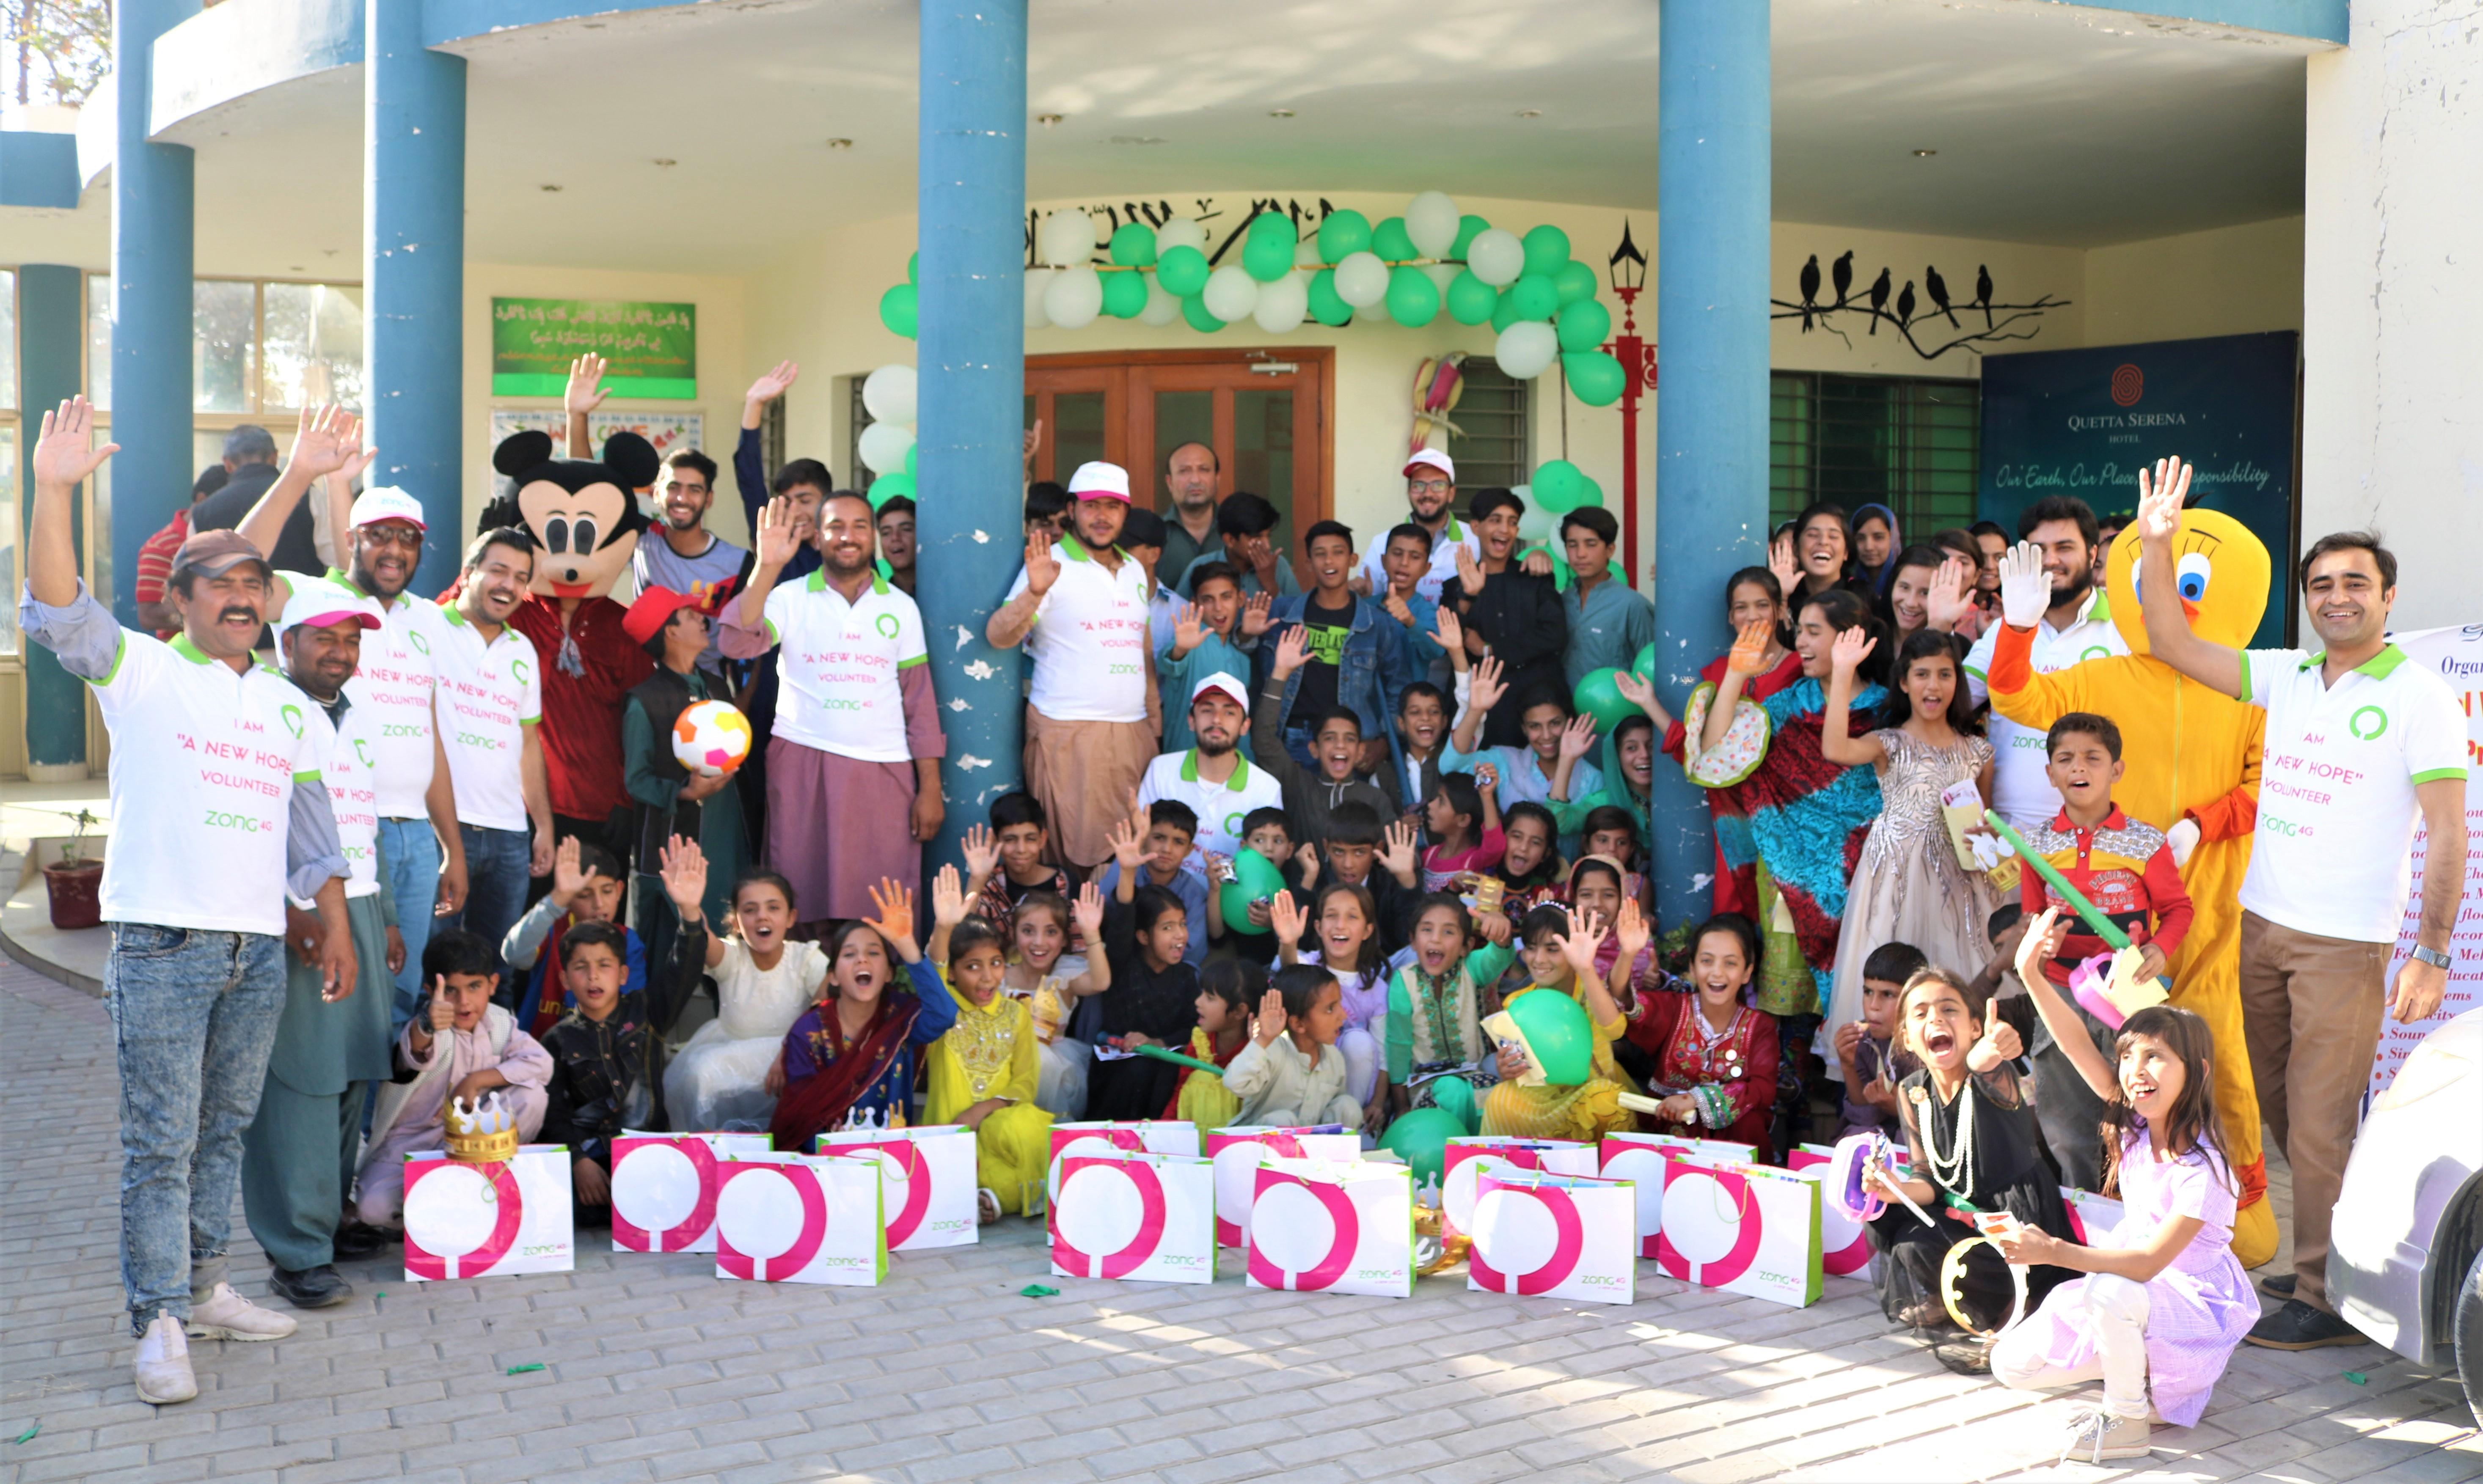 ZONG 4G’s New Hope Volunteers spend a day at SOS Children’s Village in Quetta